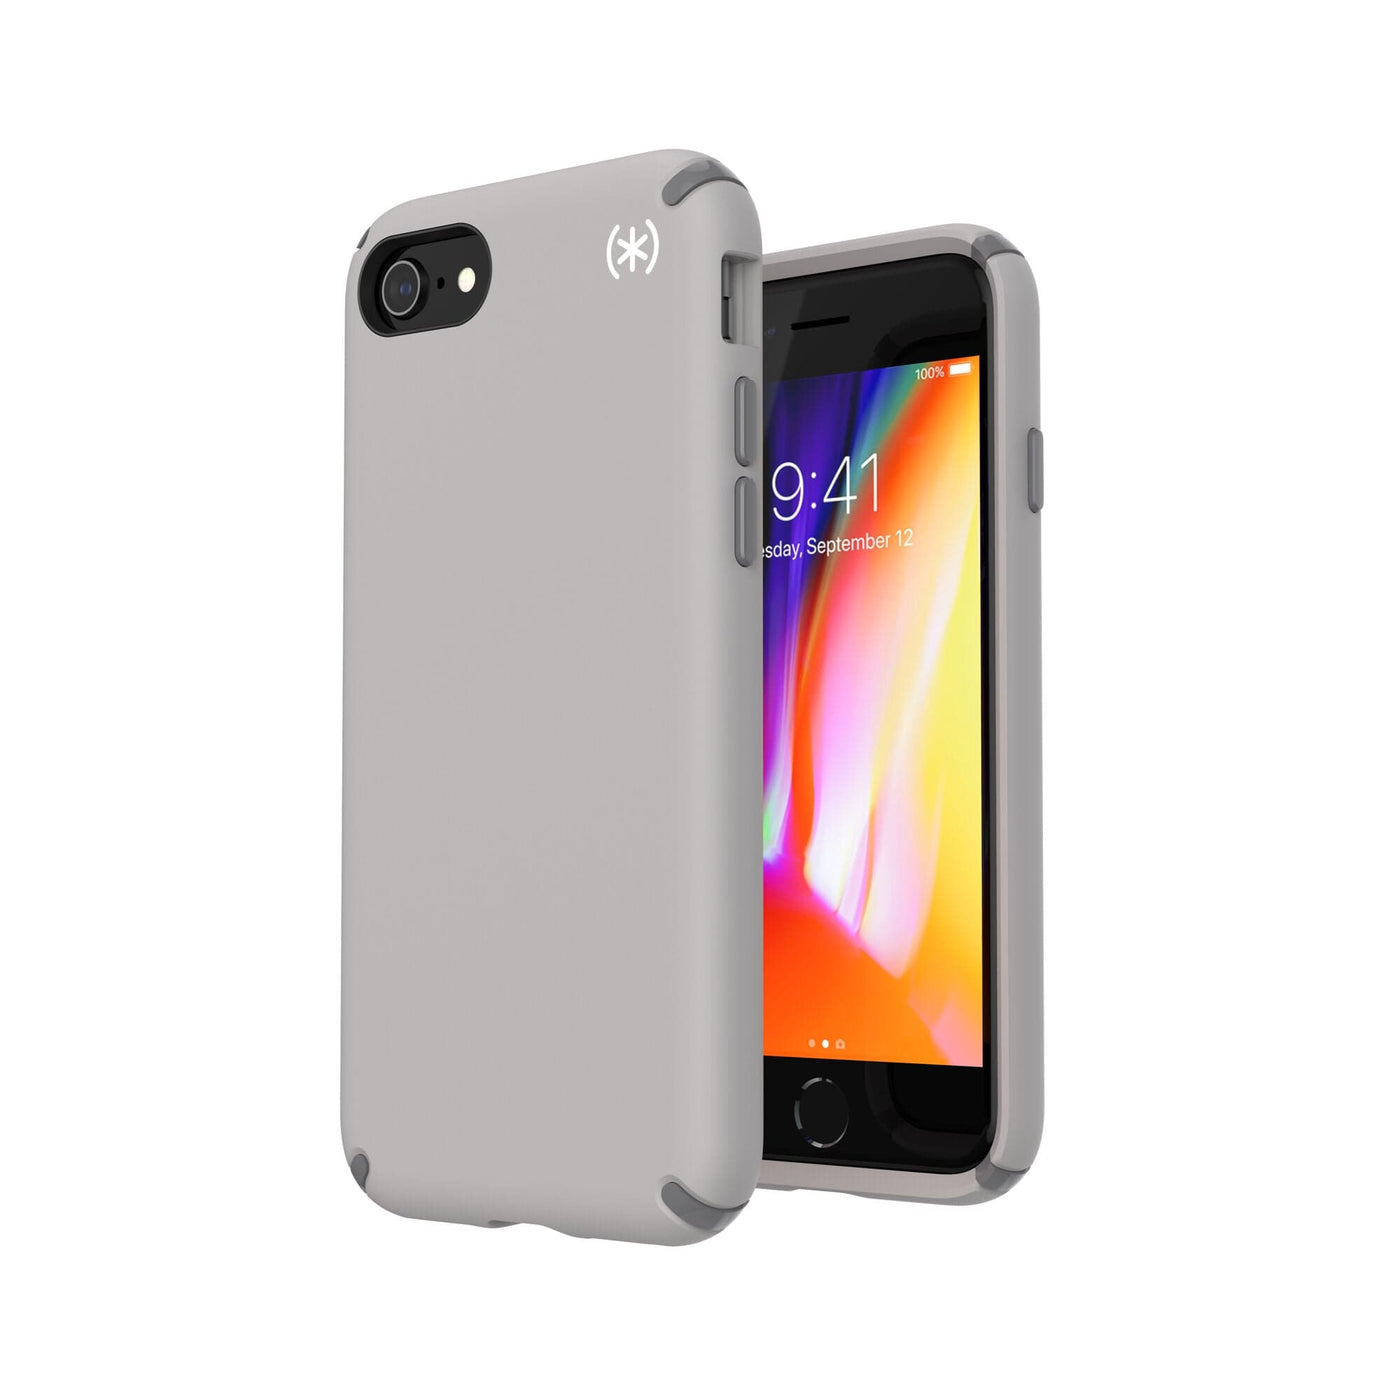 Speck Presidio Perfect-Clear with Grips iPhone 8/7 Plus Cases Best iPhone 8  Plus - $44.99